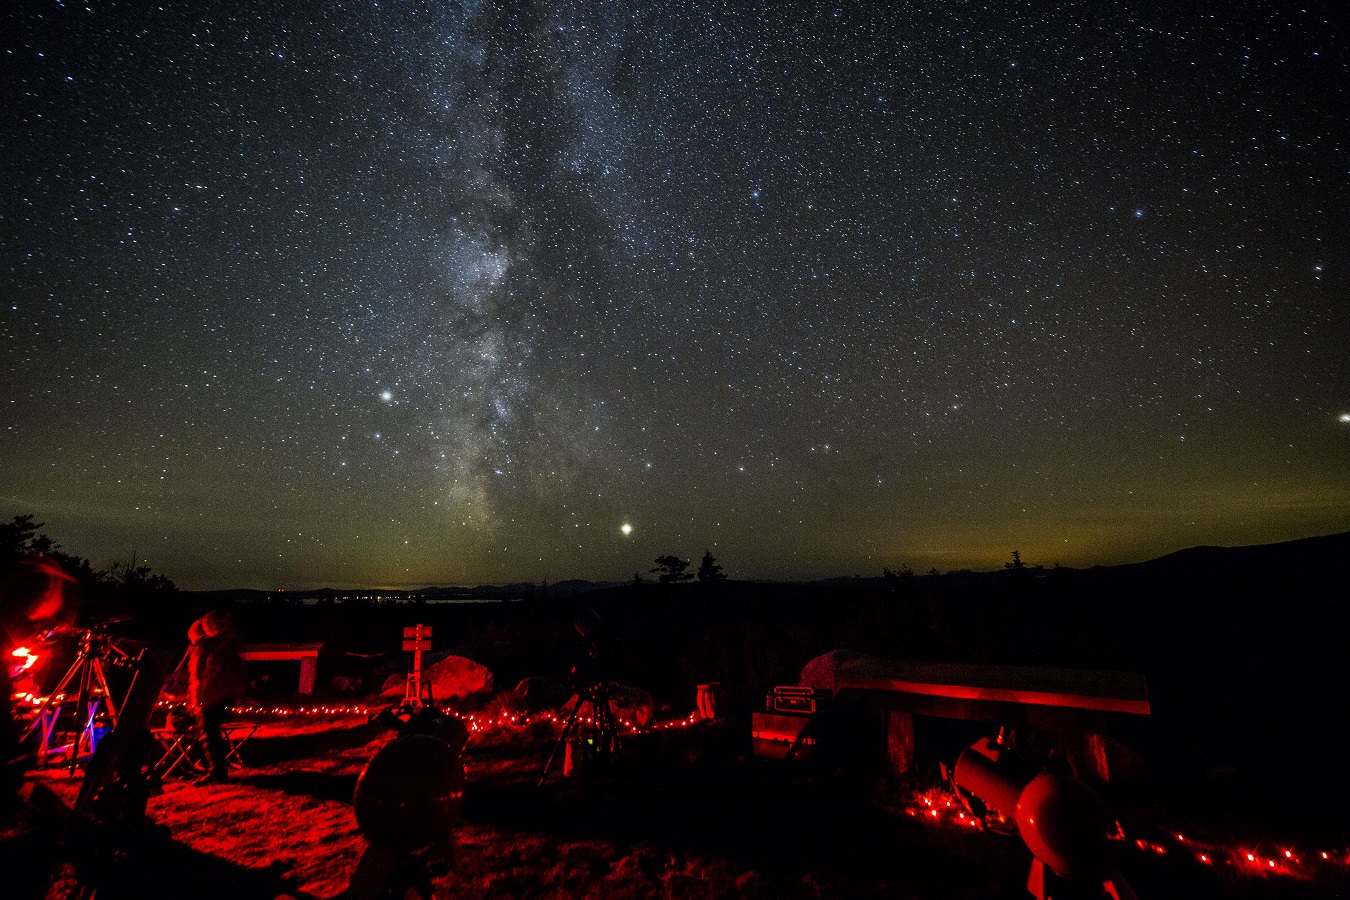 View of the Milky Way from the Loop Road Overlook at Stars Over Katahdin 2019. In the foreground people and telescopes are illuminated with red light.